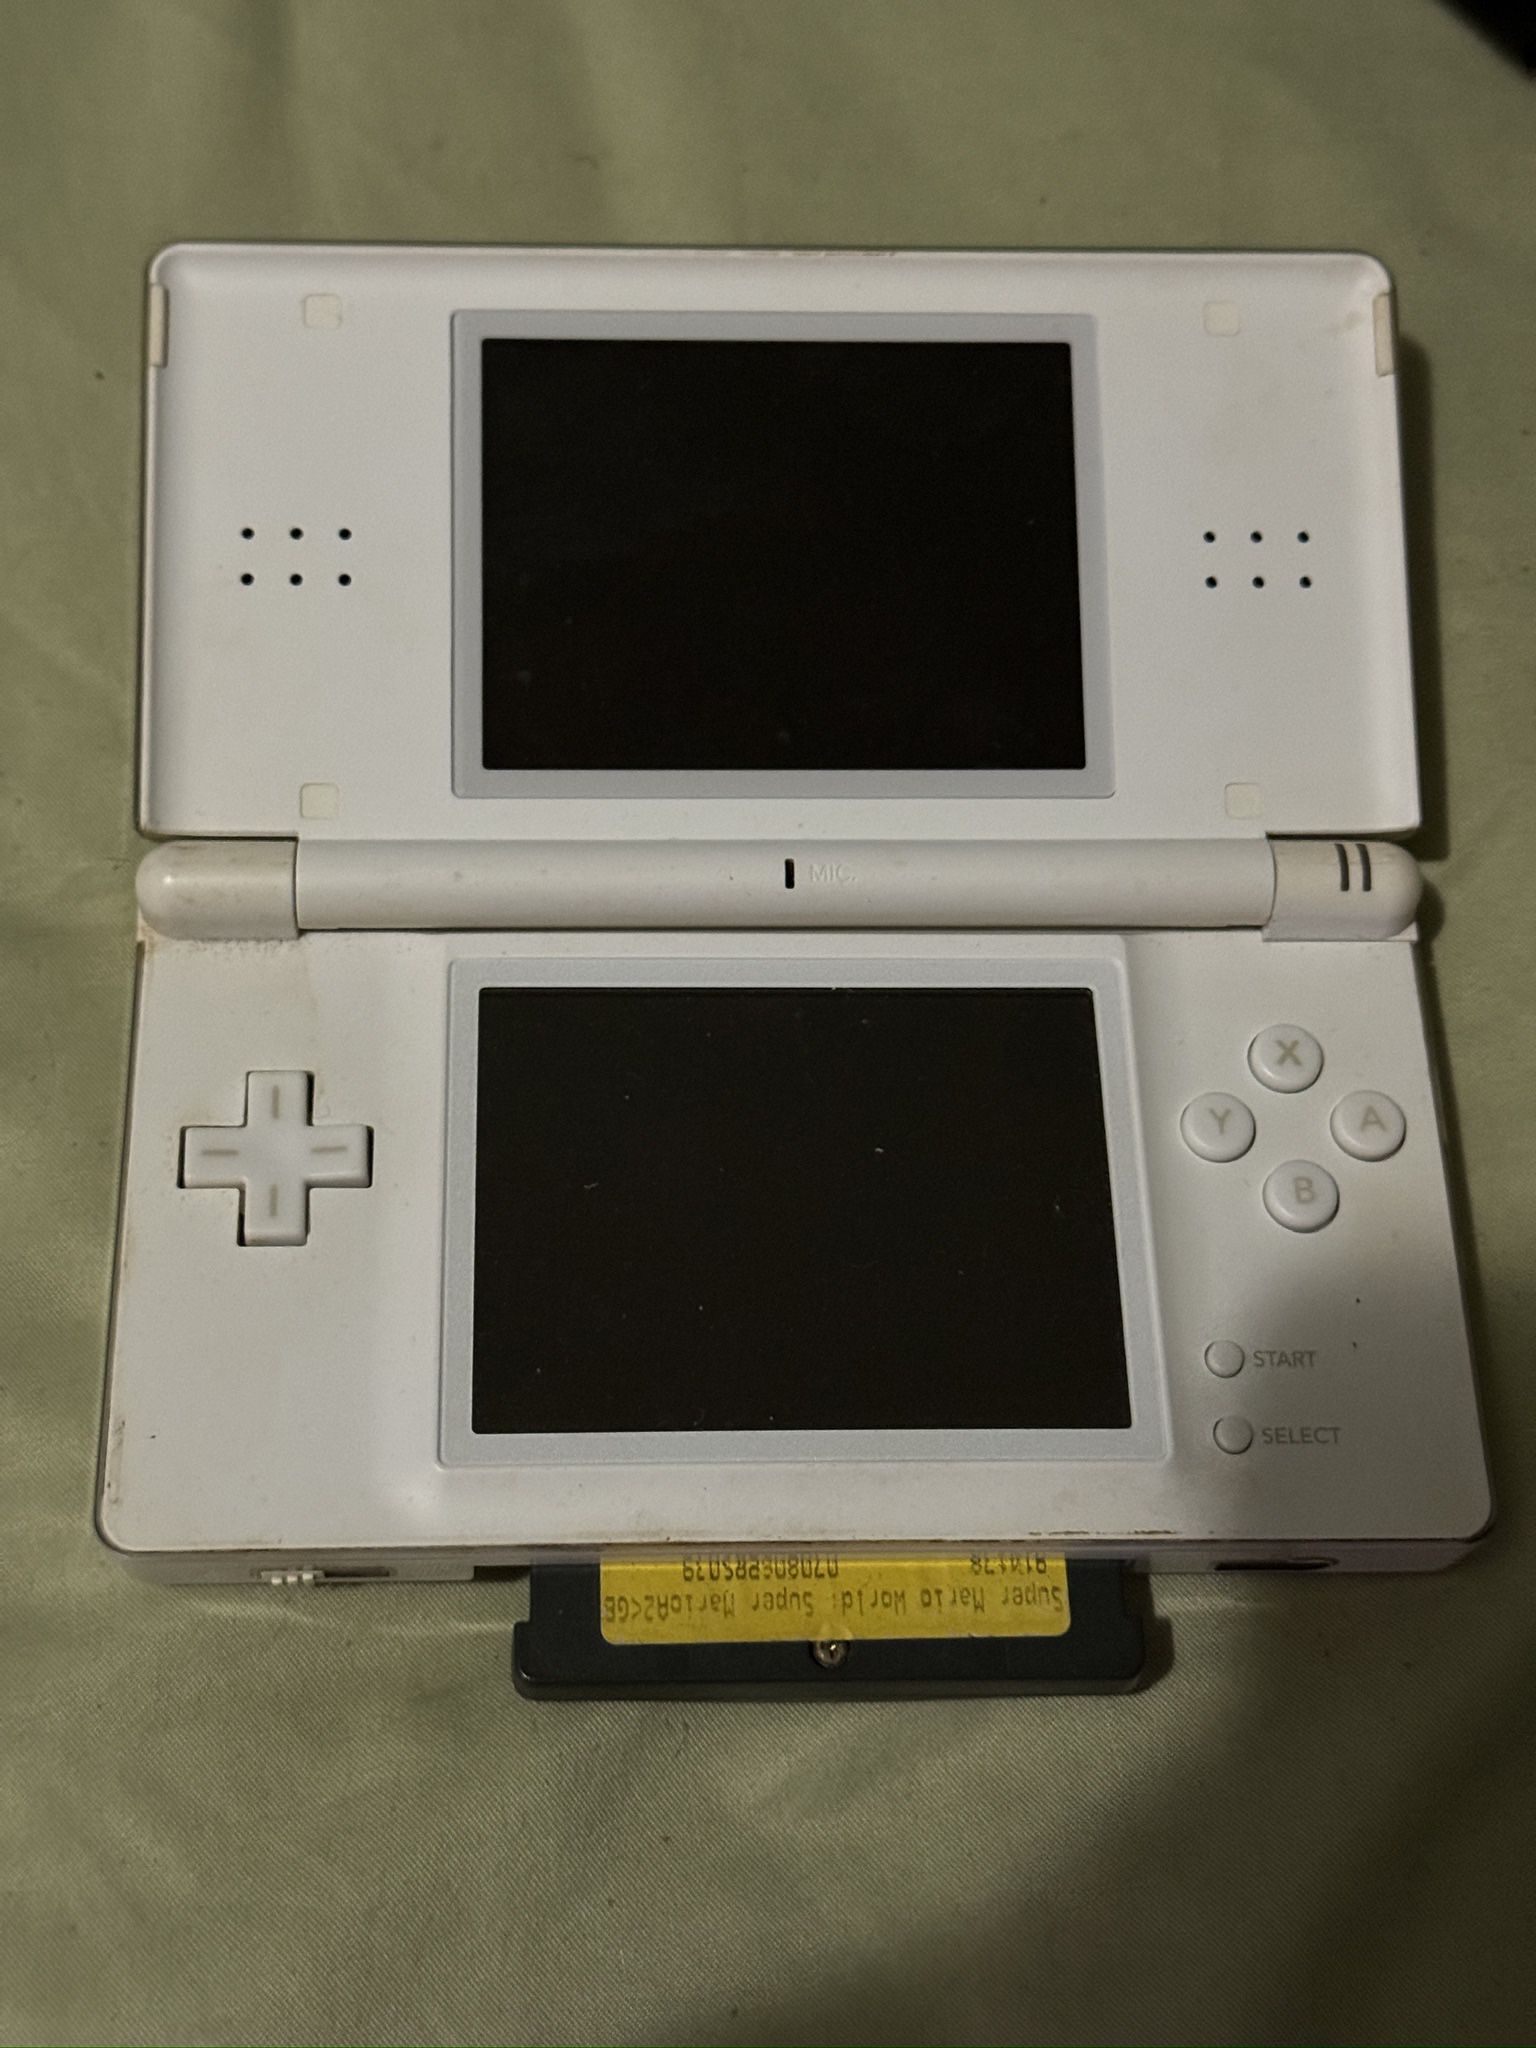 Nintendo Ds Light Great Condition Comes With Super Mario World